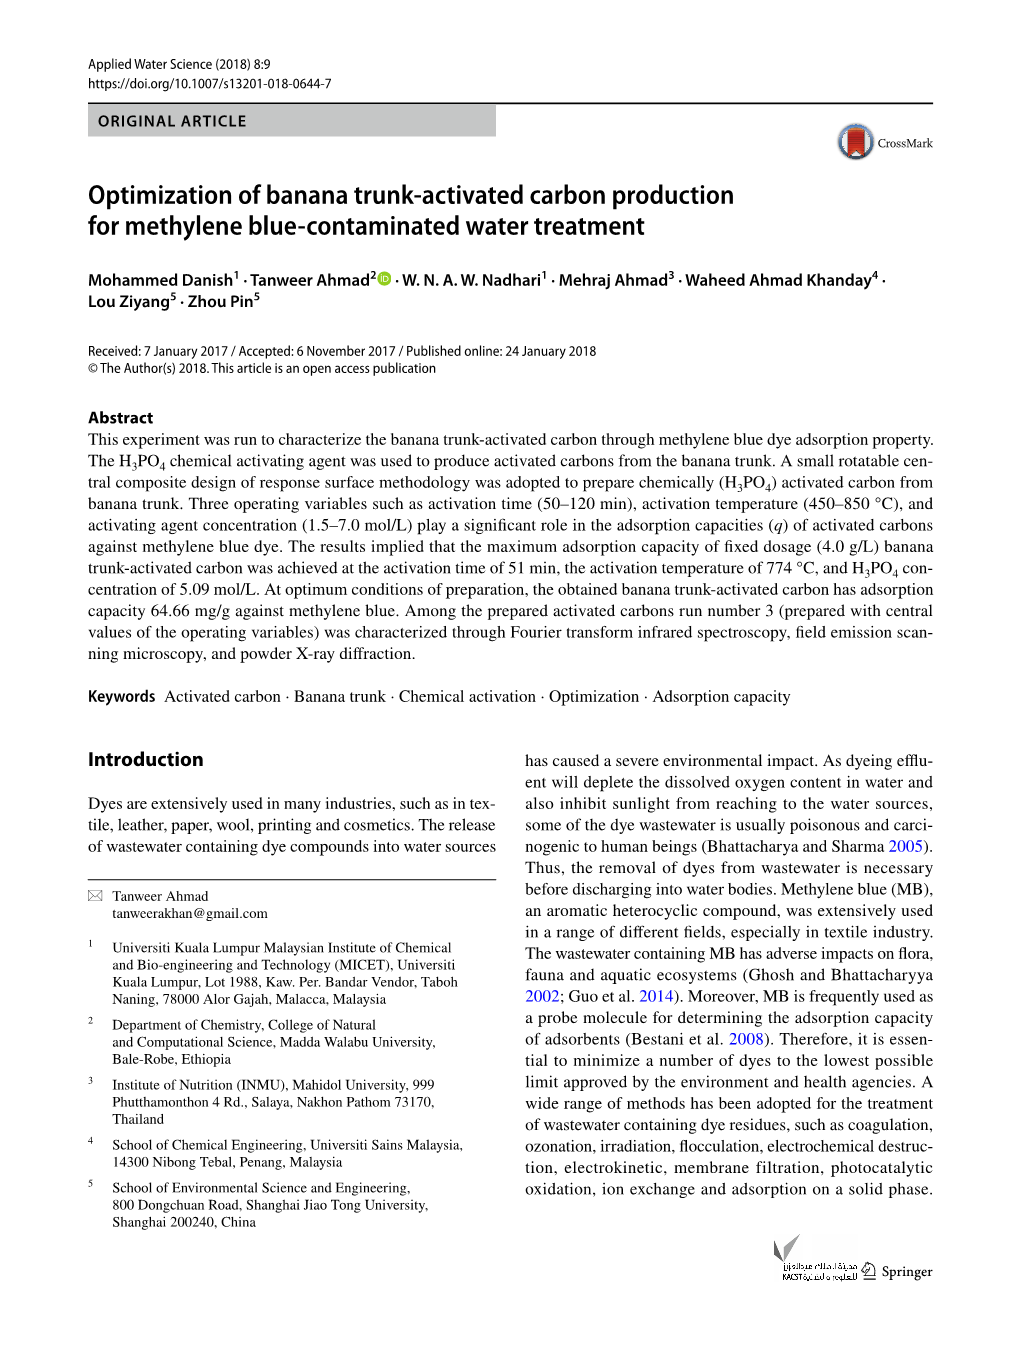 Optimization of Banana Trunk-Activated Carbon Production